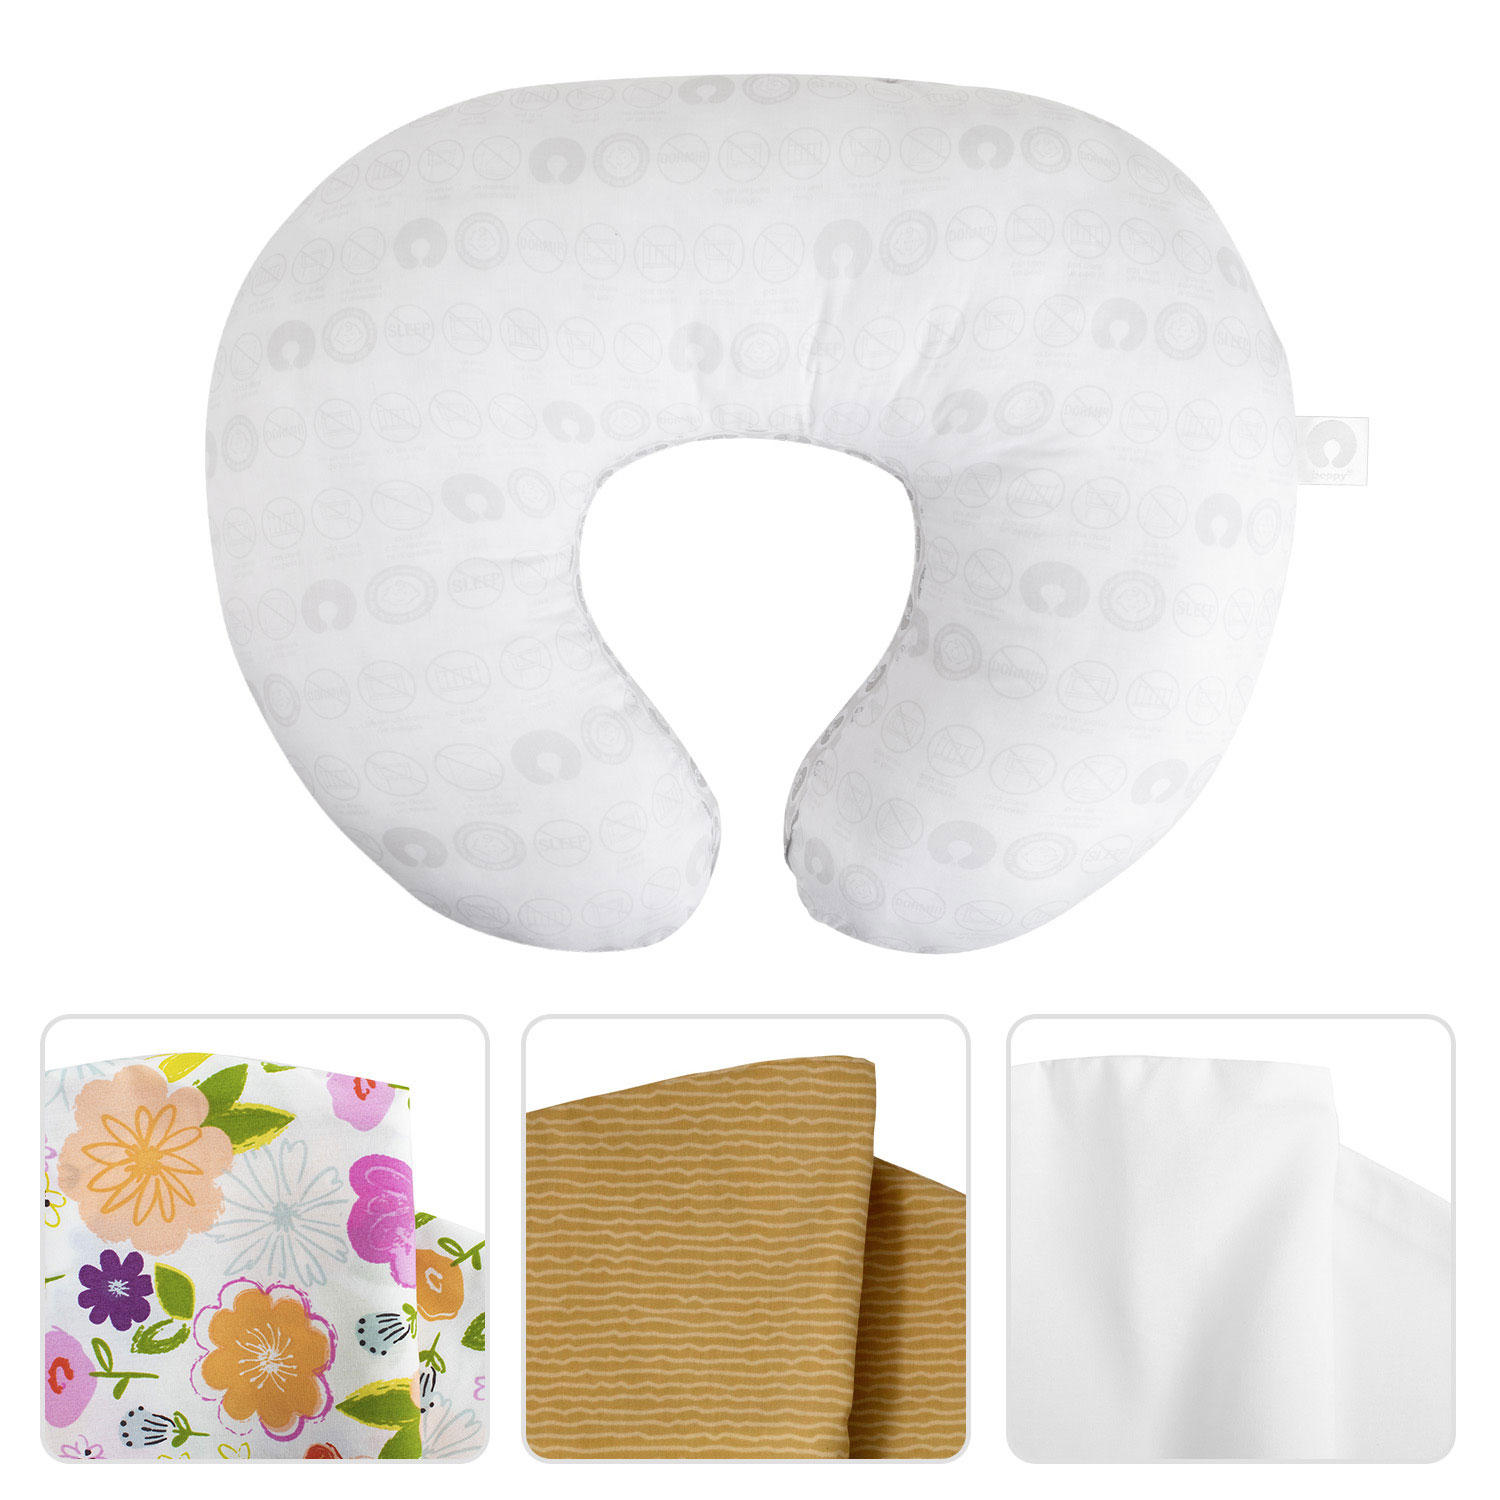 Boppy Perfect Breastfeeding Support Bundle + Accessories, Spring Flowers